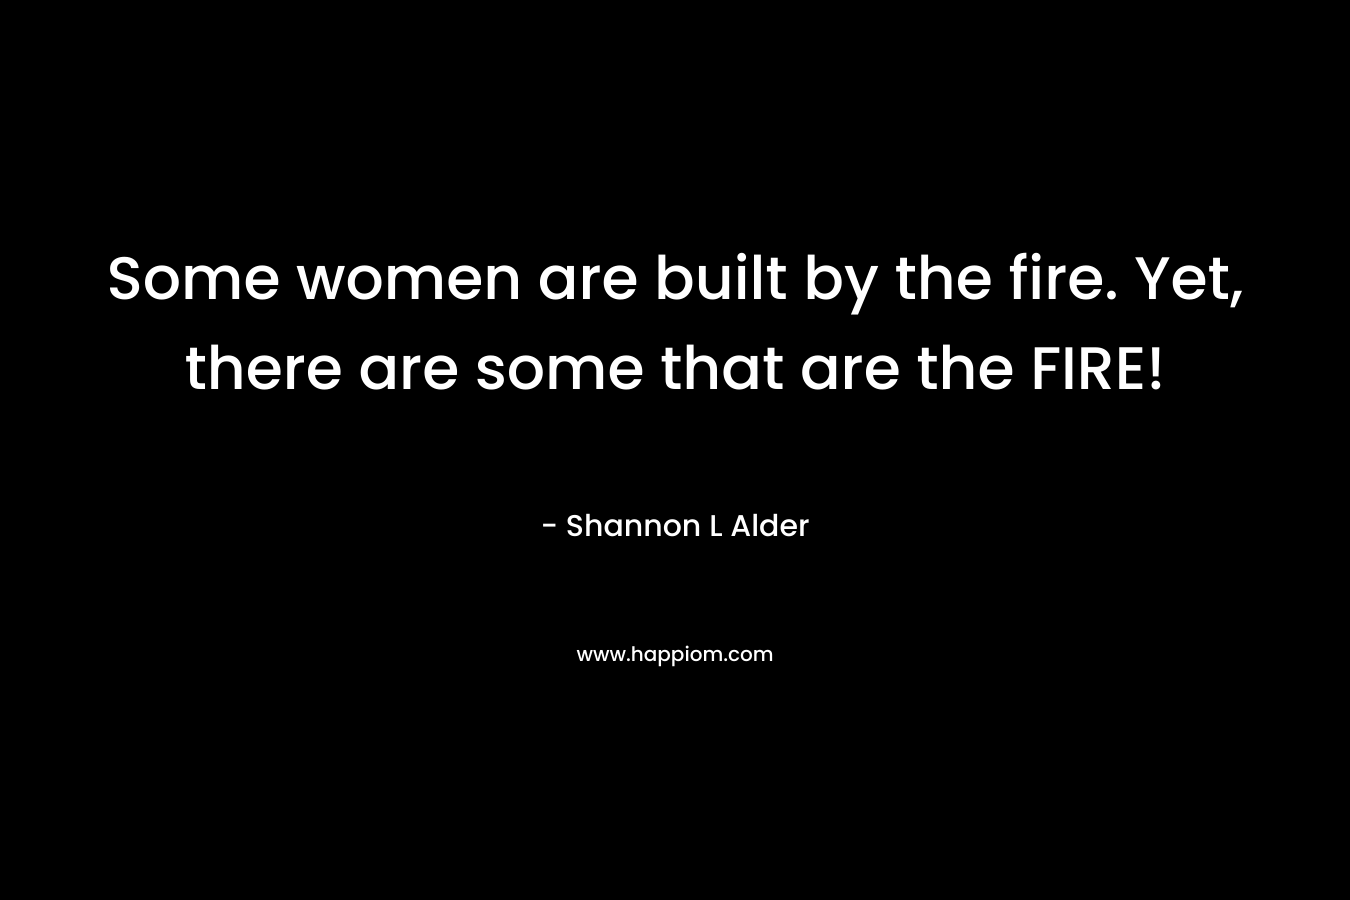 Some women are built by the fire. Yet, there are some that are the FIRE!